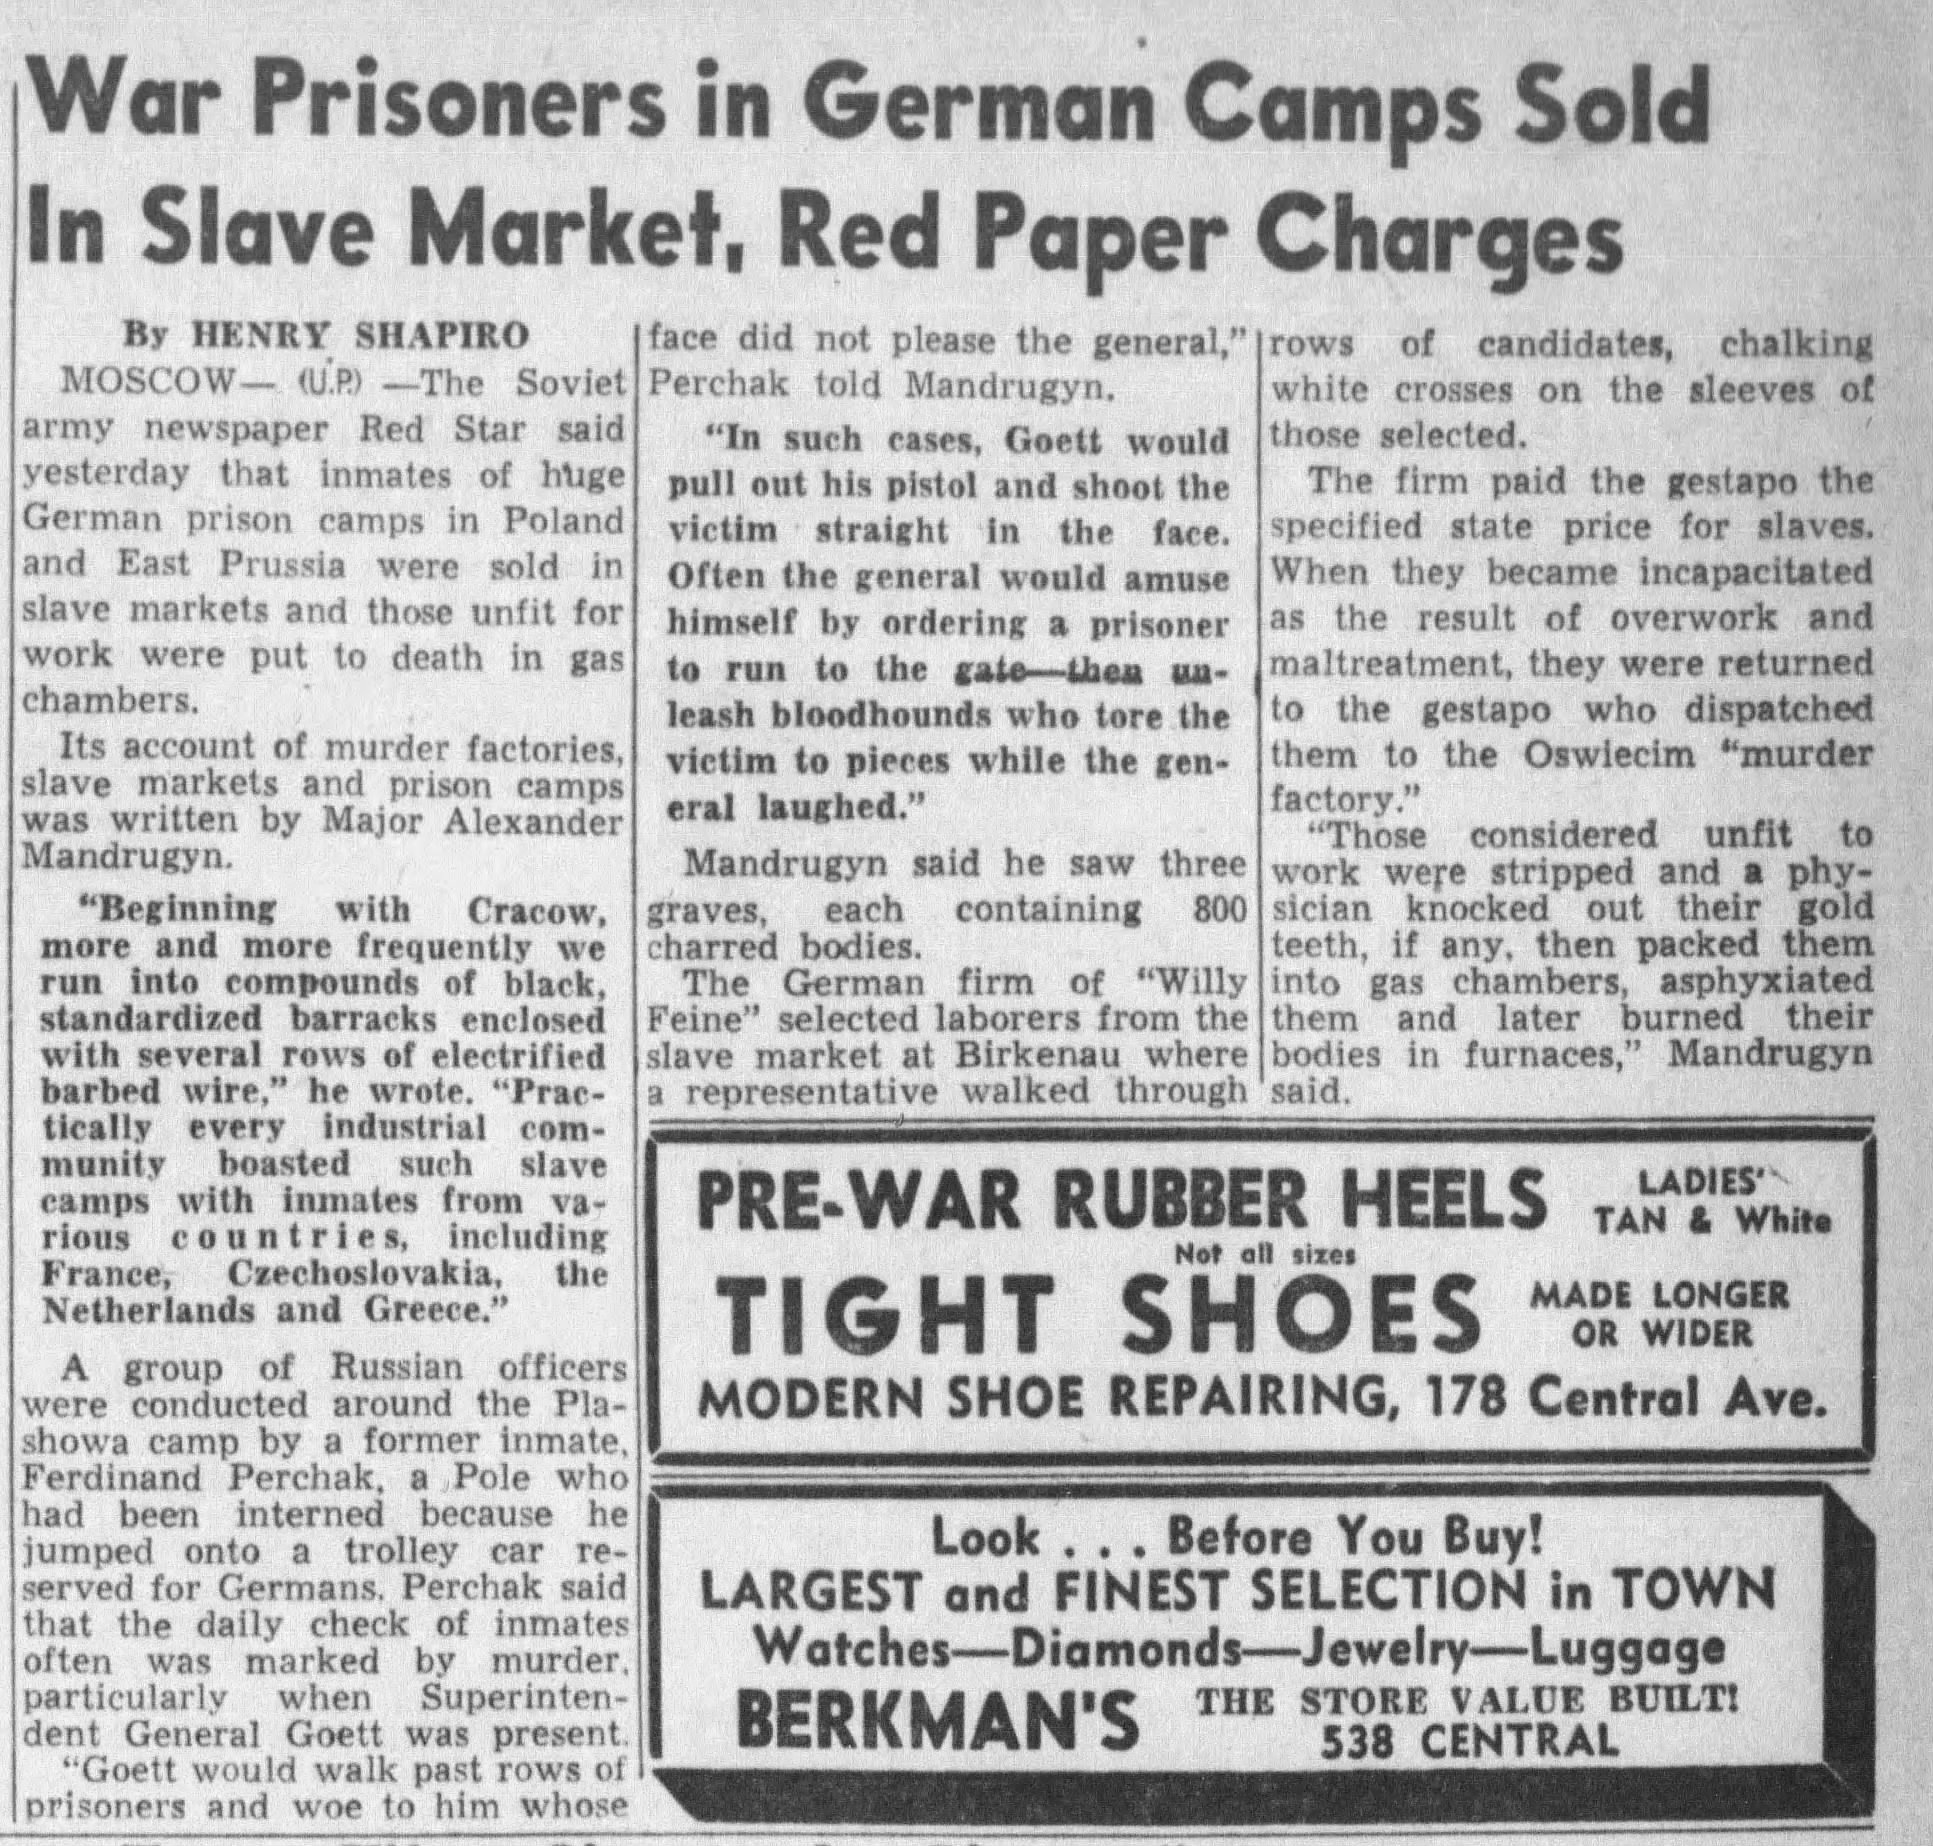 War Prisoners in German Camps Sold In Slave Market, Red Paper Charges